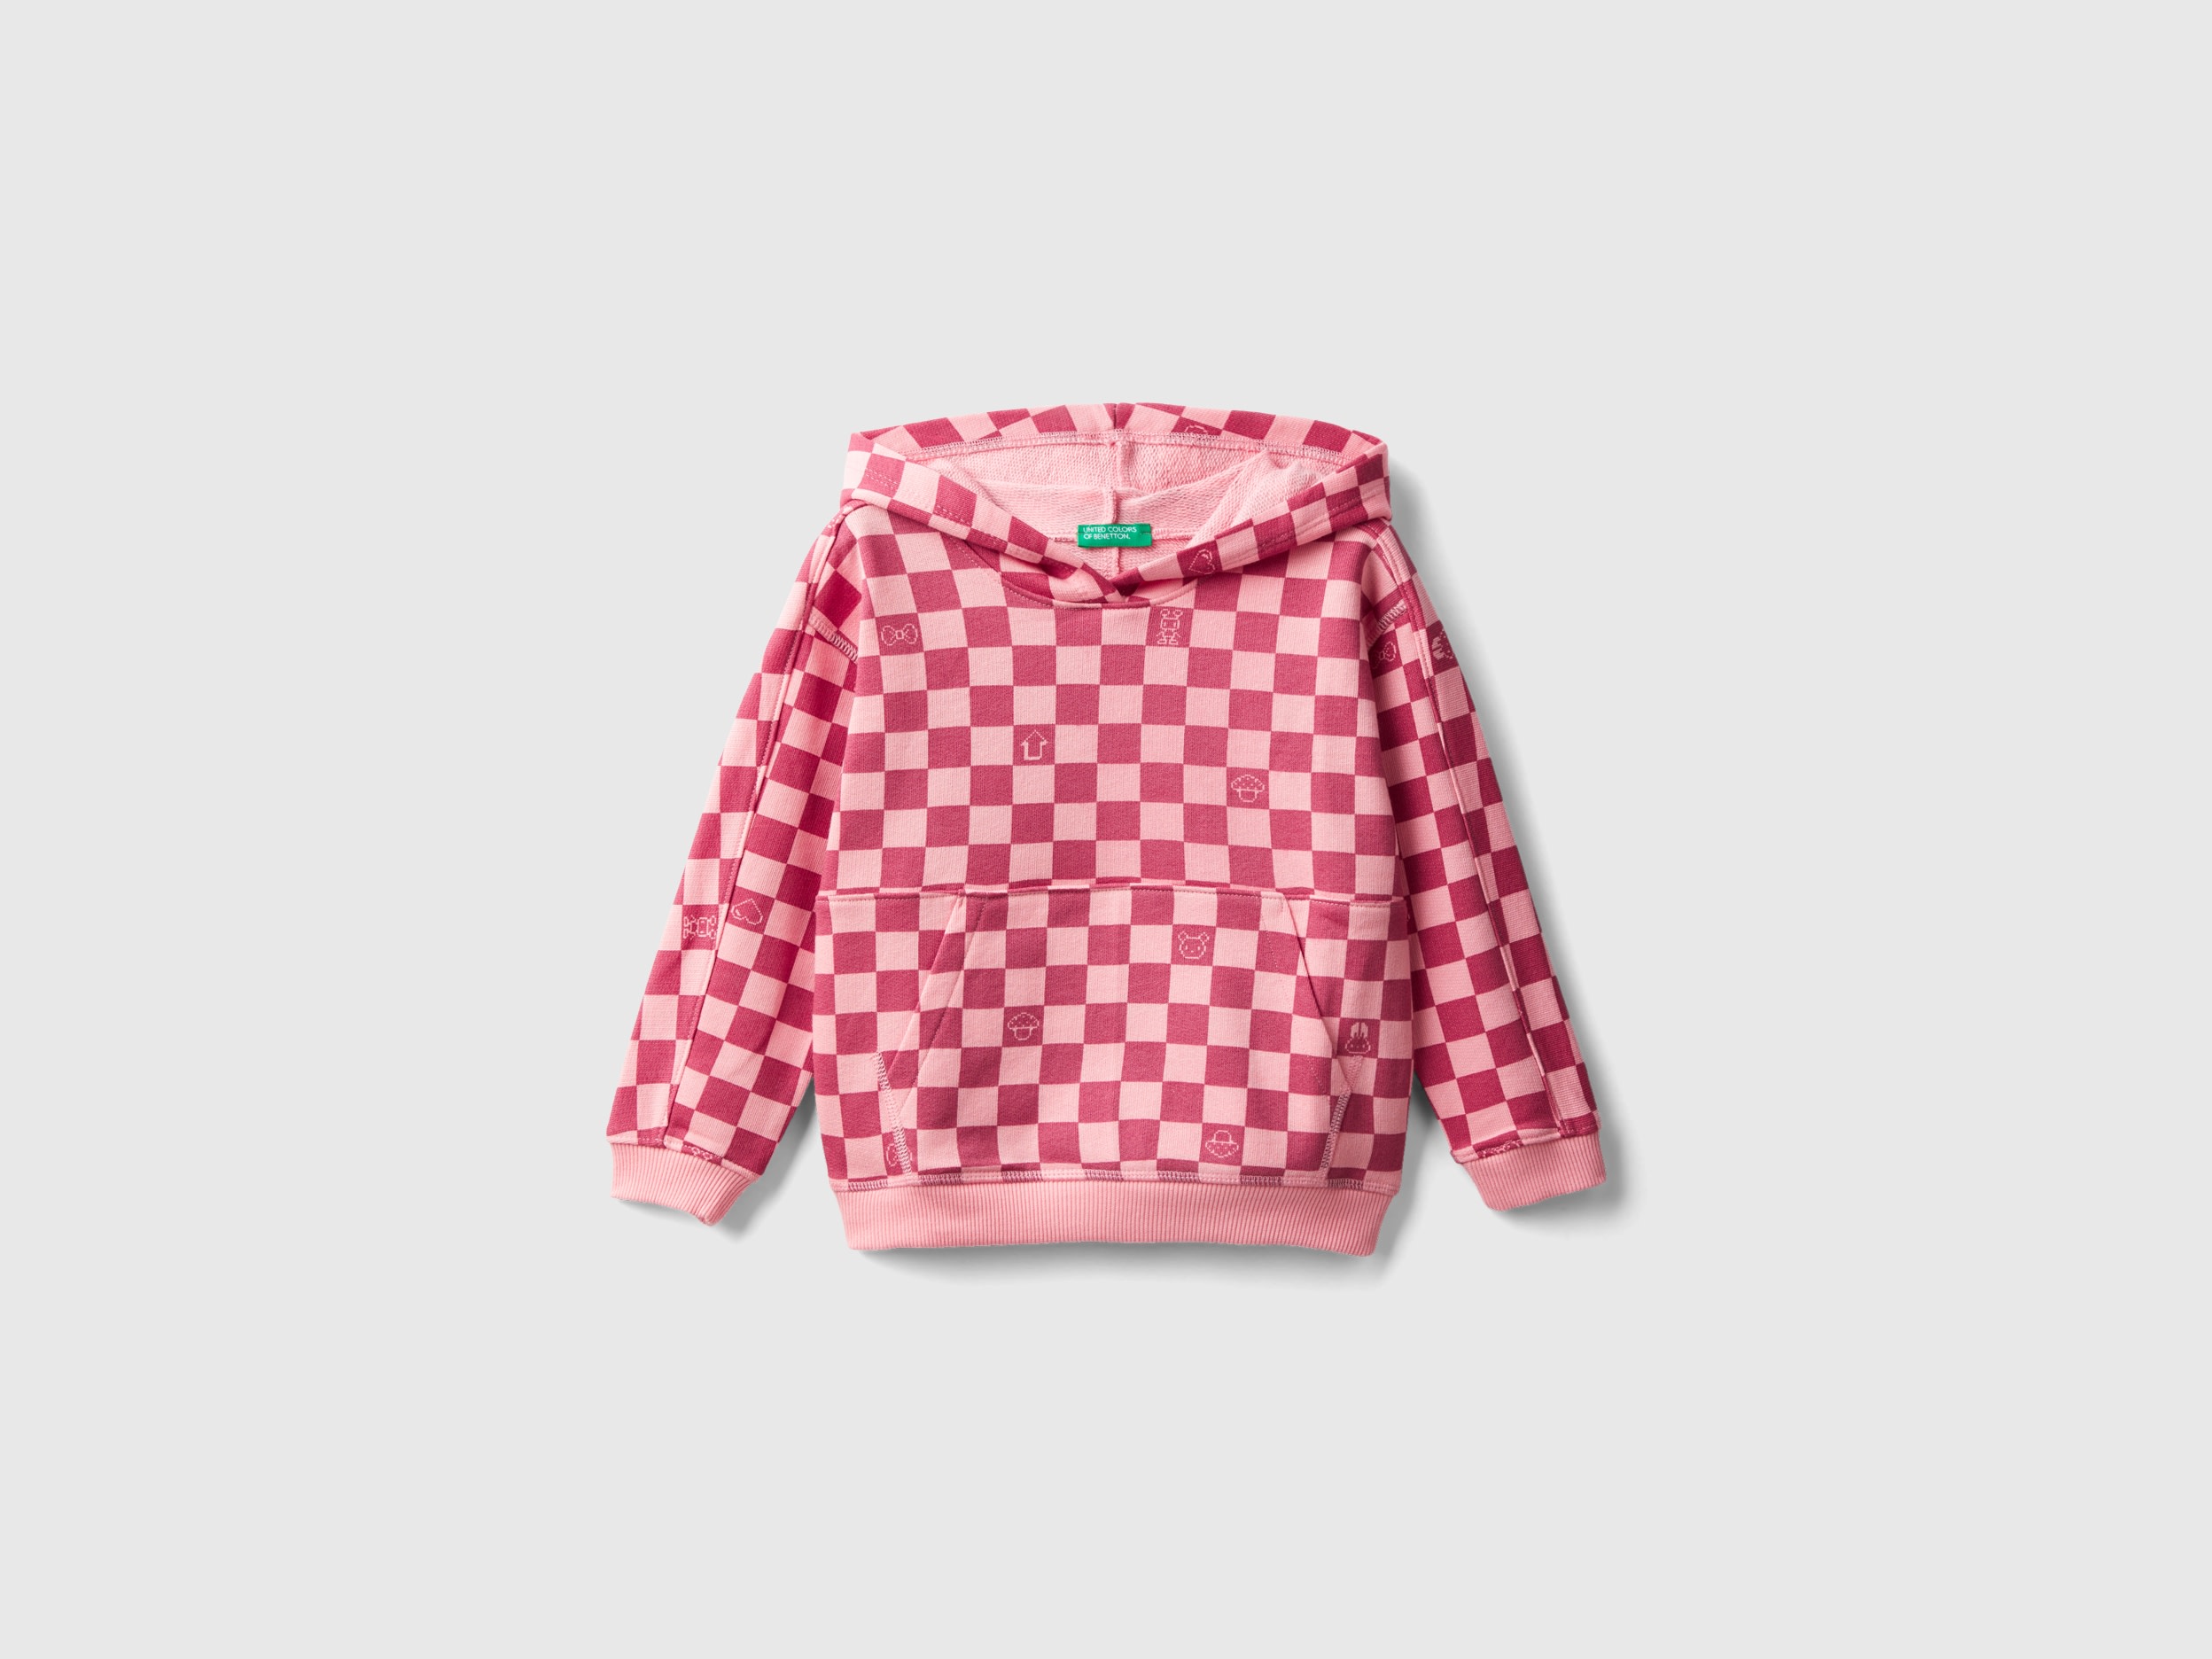 Benetton, Checkered Hoodie, size 12-18, Multi-color, Kids